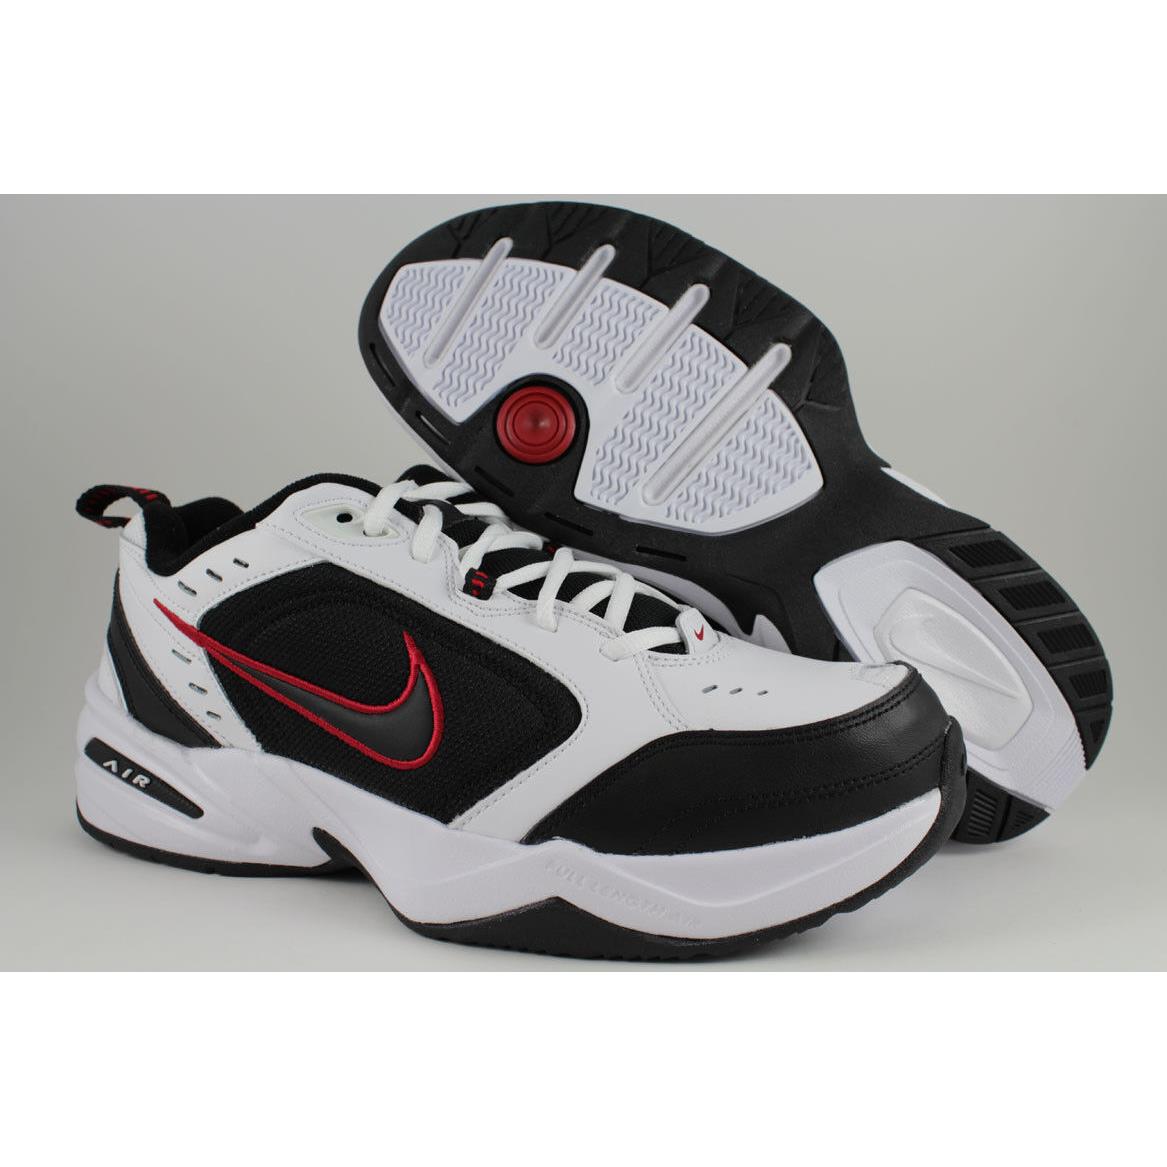 Nike Air Monarch IV 4 Extra Wide 4E Eeee White/black/red Cross Trainer Men Sizes